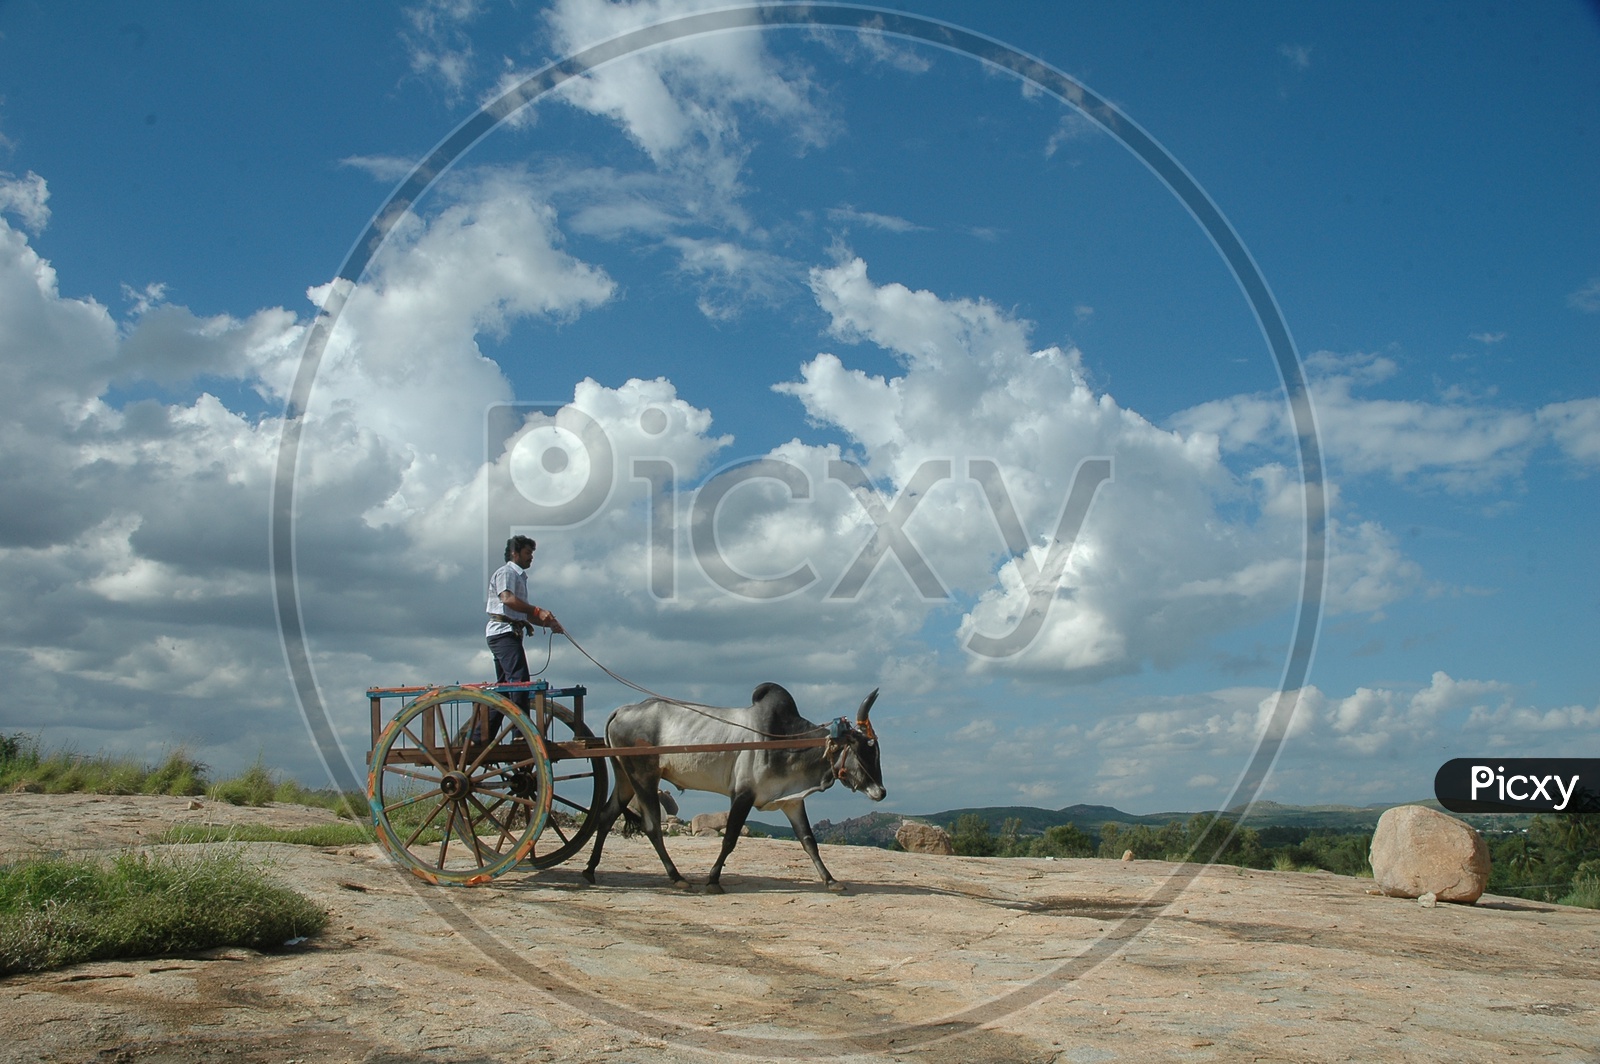 Riding Bullock Cart in standing position